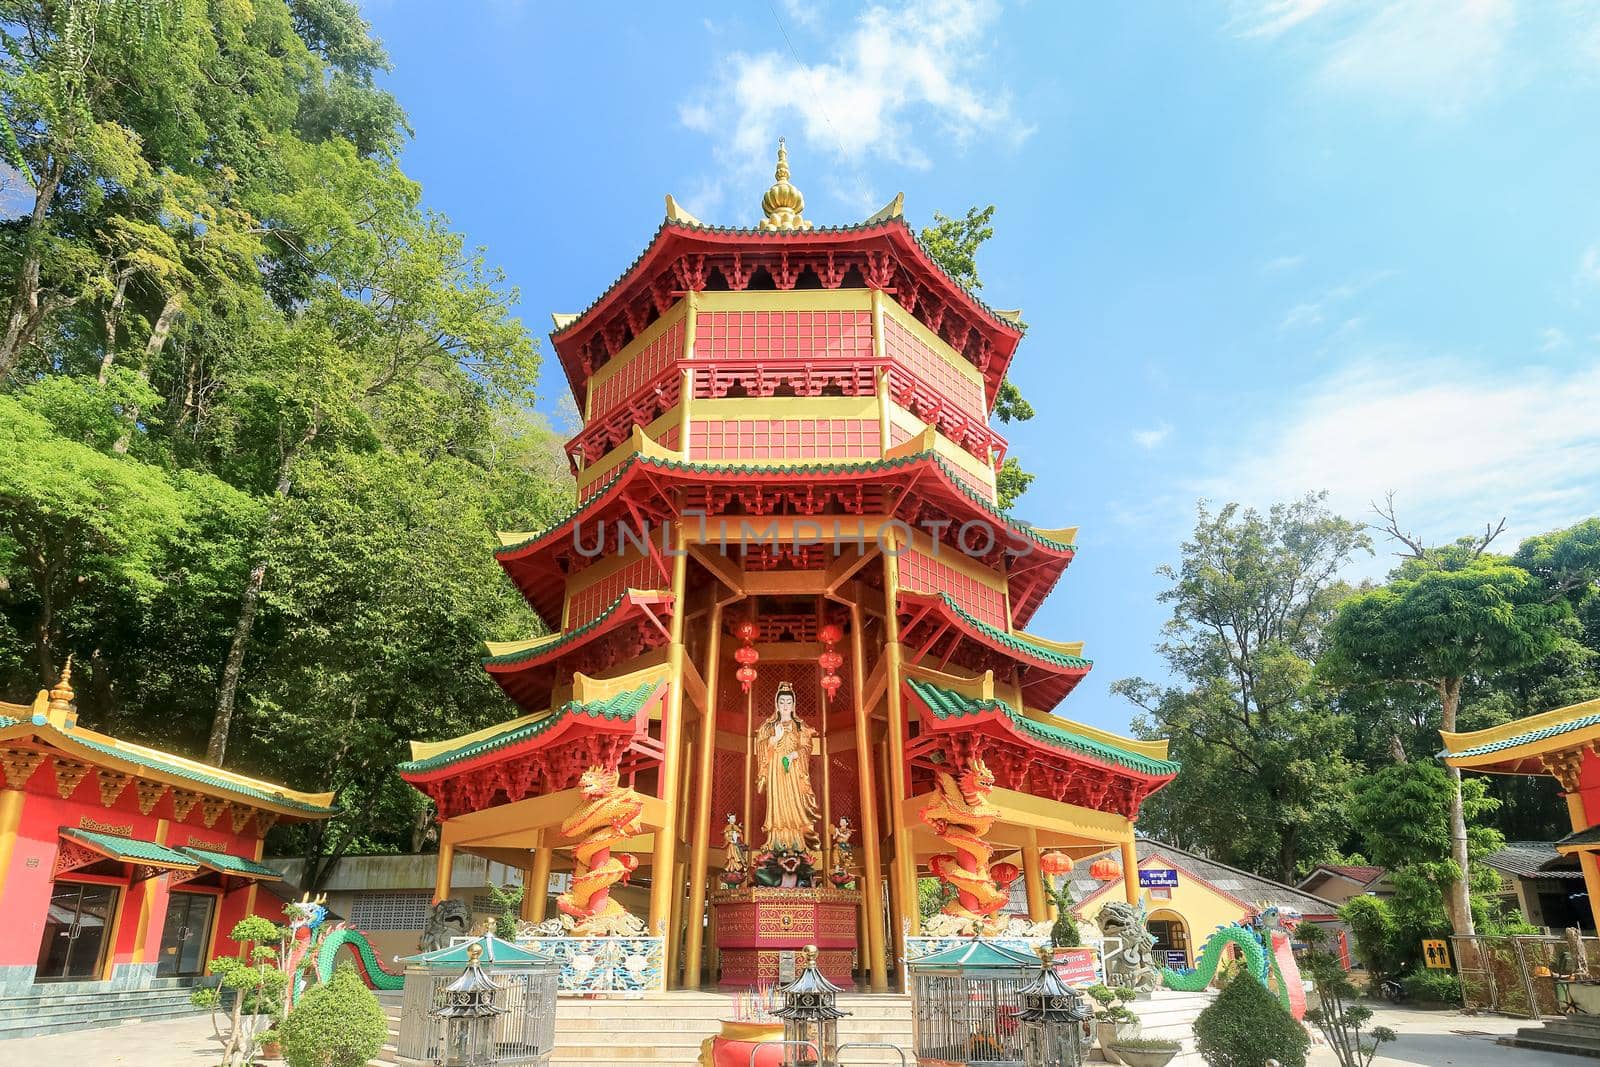 Chinese style pagoda with a giant statue of Guan Yin or goddess of compassion and mercy at Tiger Cave Temple (Wat Tham Seua) in Krabi, Thailand. by toa55